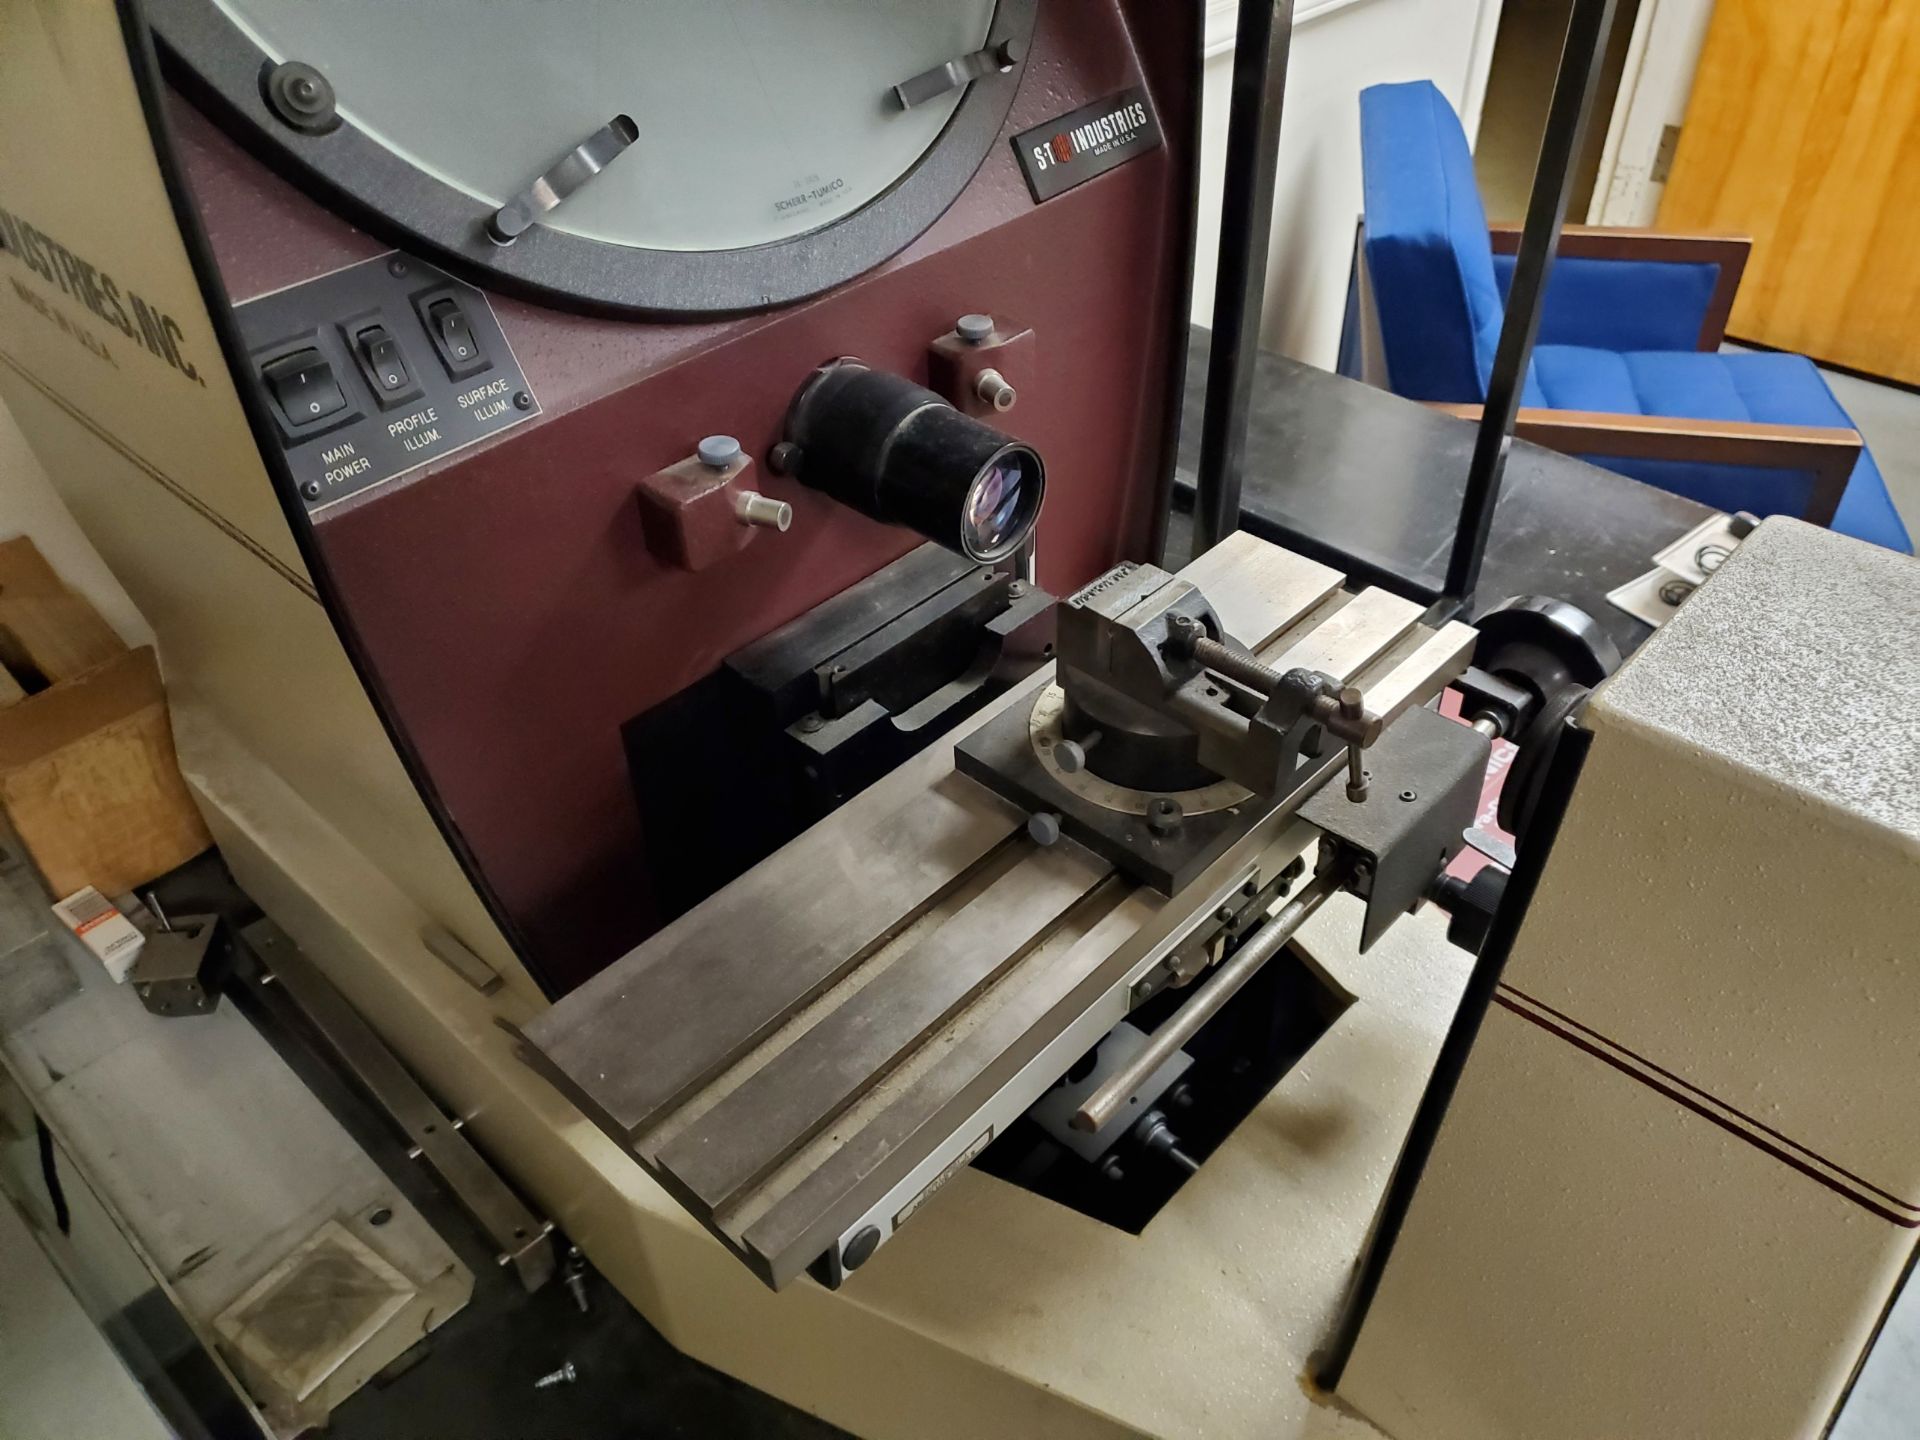 Scheer-Tumico 20-3600 14" Bench Top Optical Comparator - Image 2 of 3